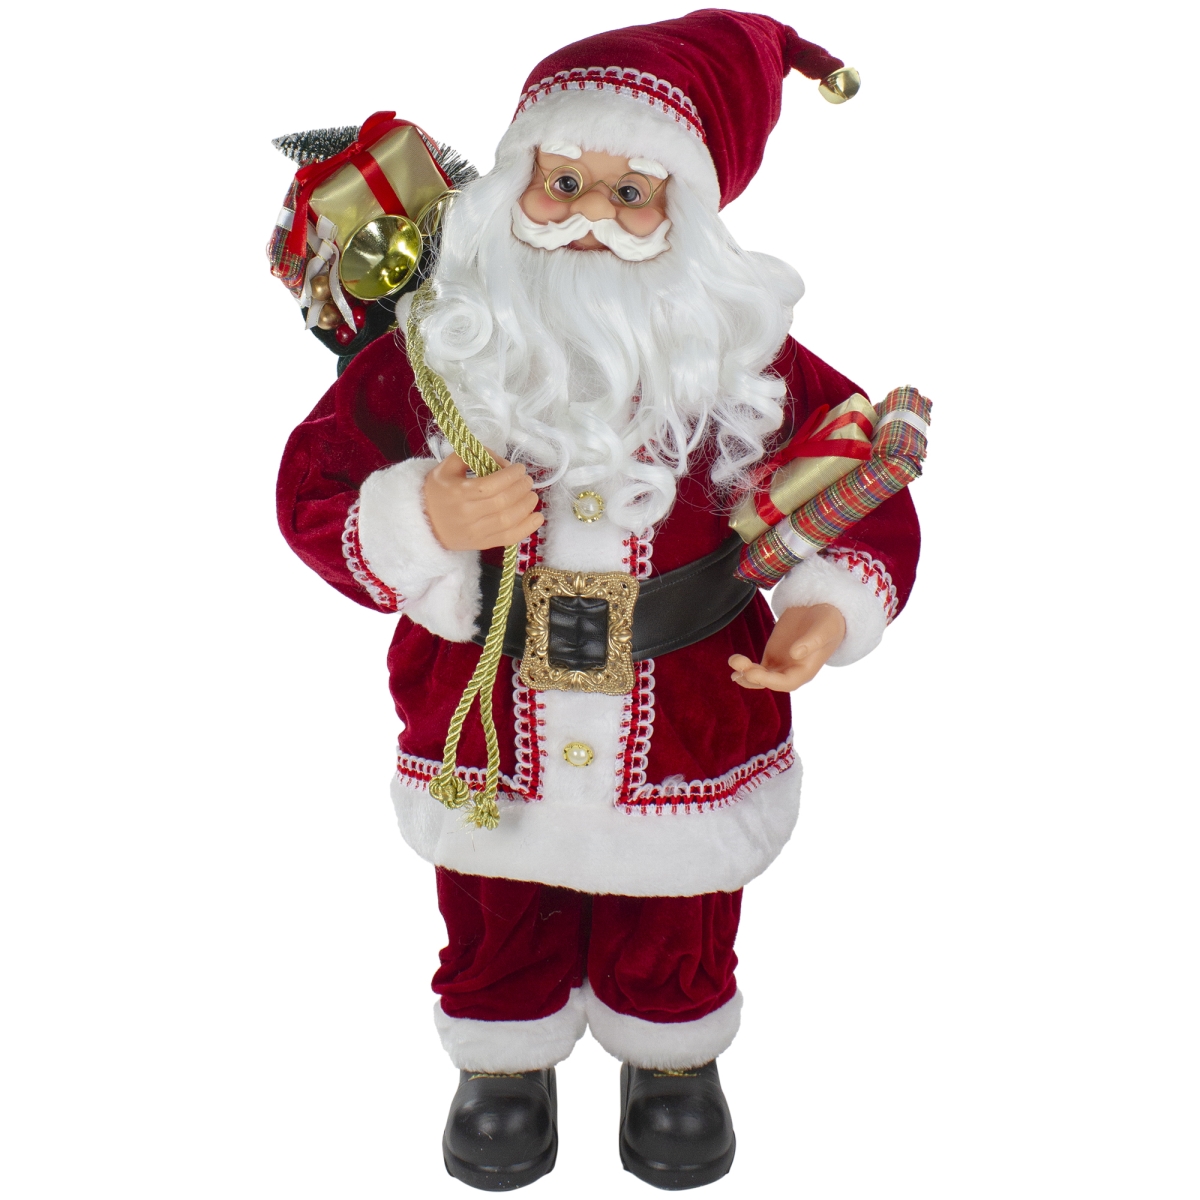 Northlight 34316627 2 ft. Standing Curly Beard Santa Christmas Figure with Presents